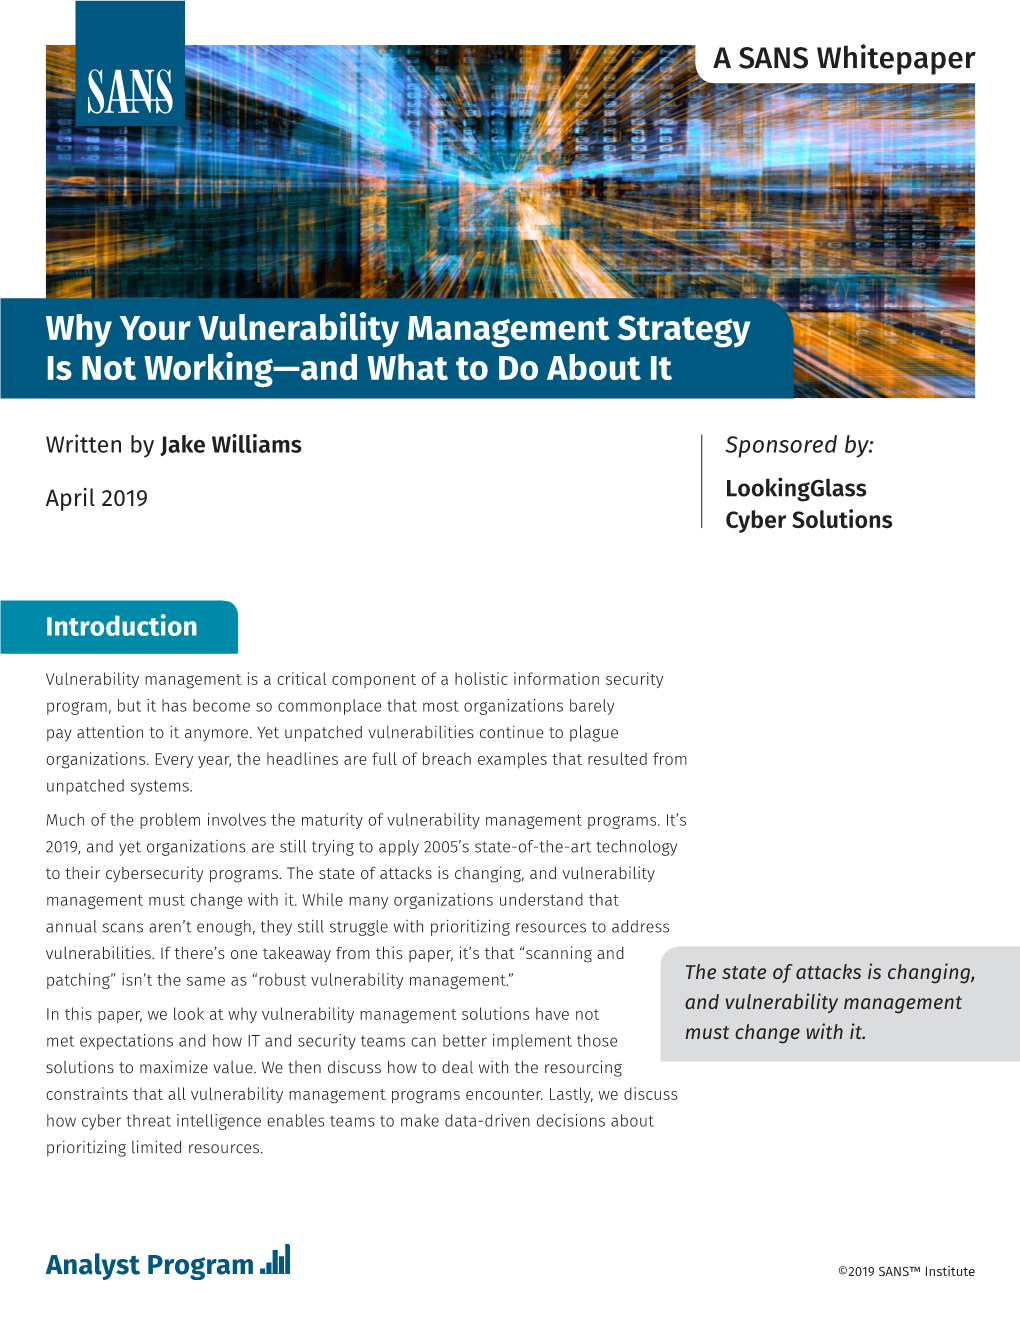 Why Your Vulnerability Management Strategy Is Not Working—And What to Do About It